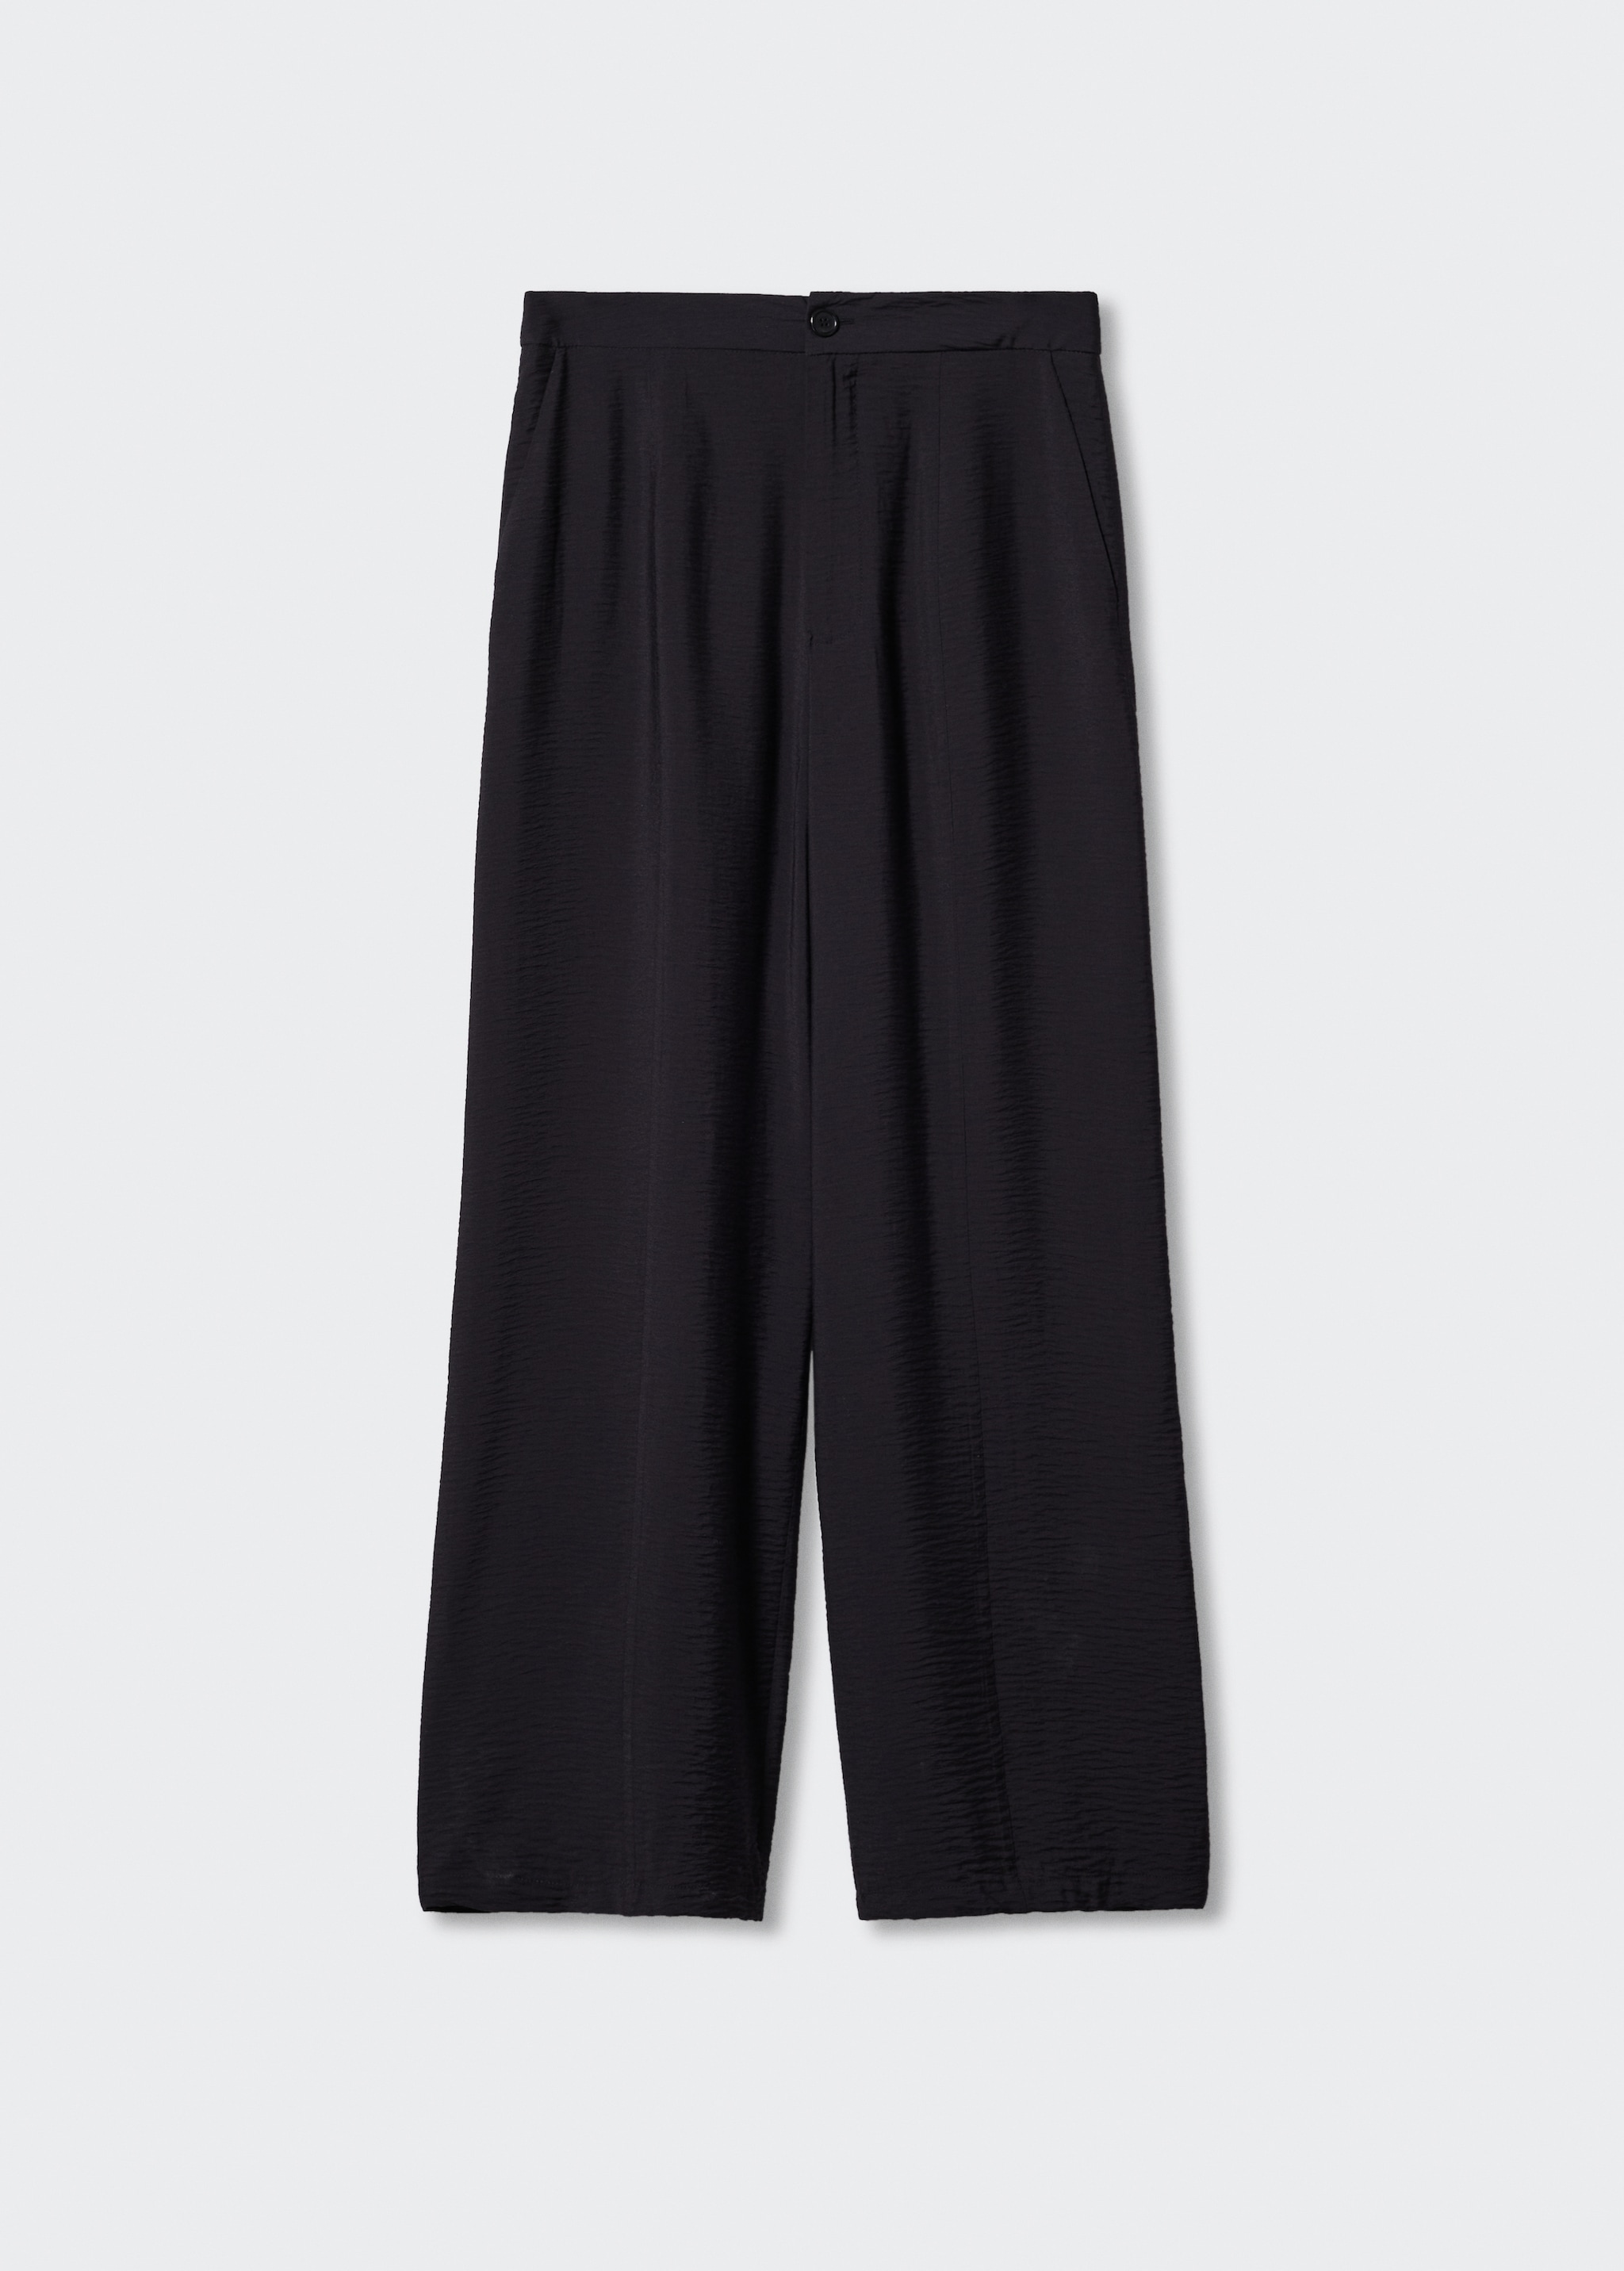 Textured flowy trousers - Article without model